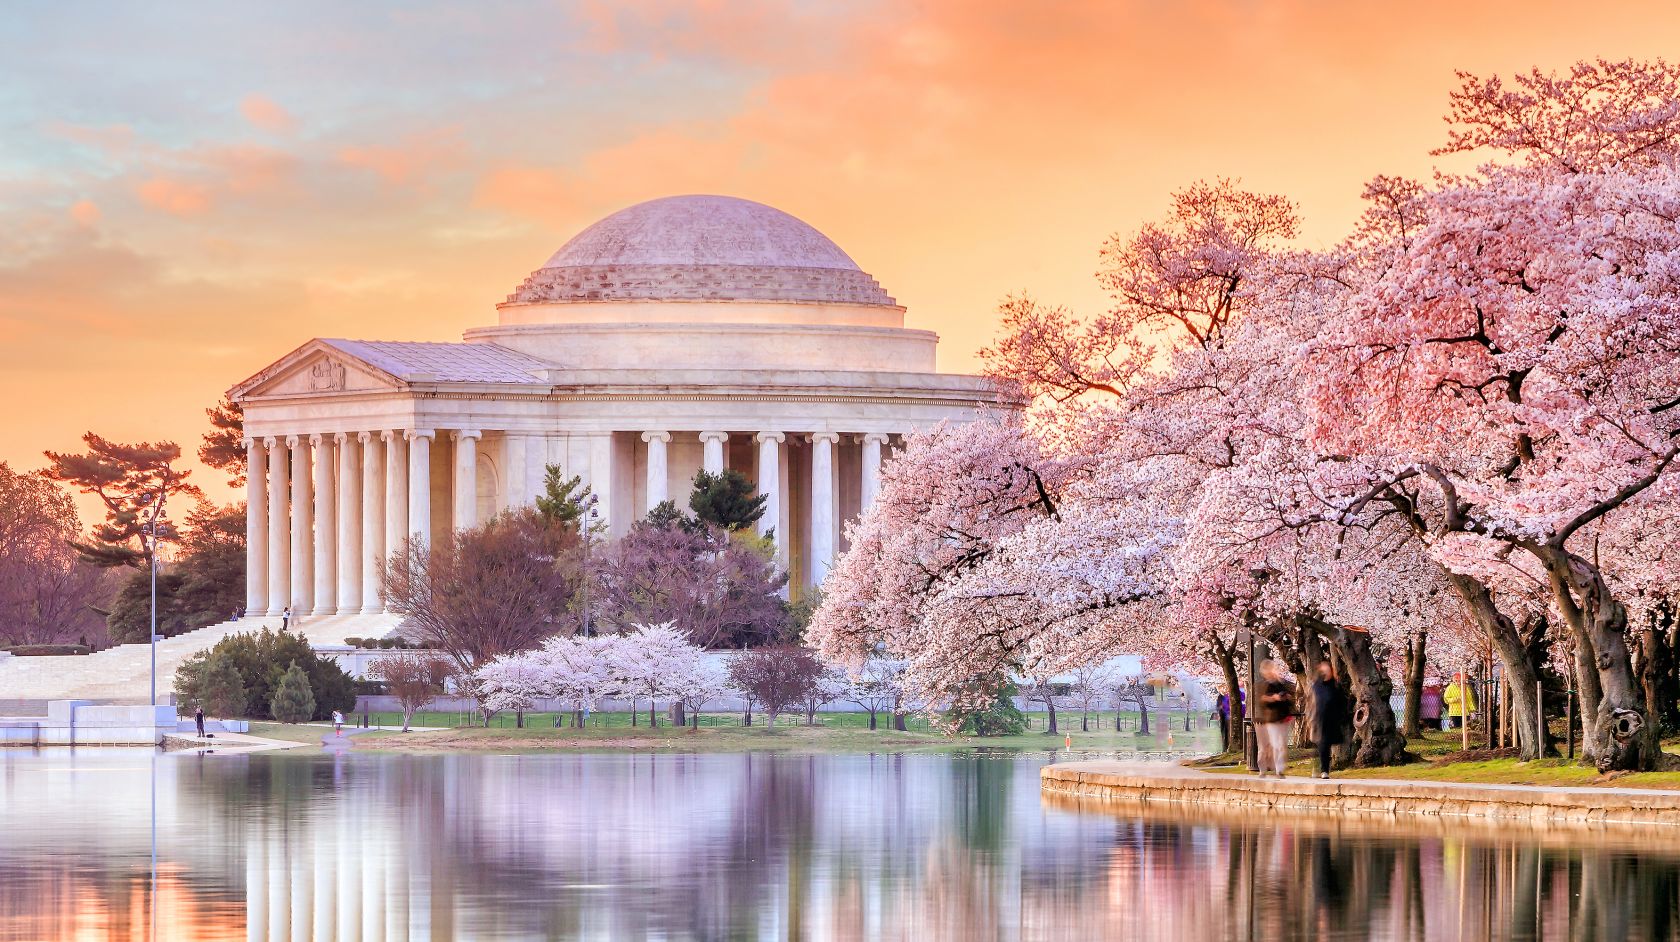 Jefferson Memorial at sunset surrounded by cherry blossoms